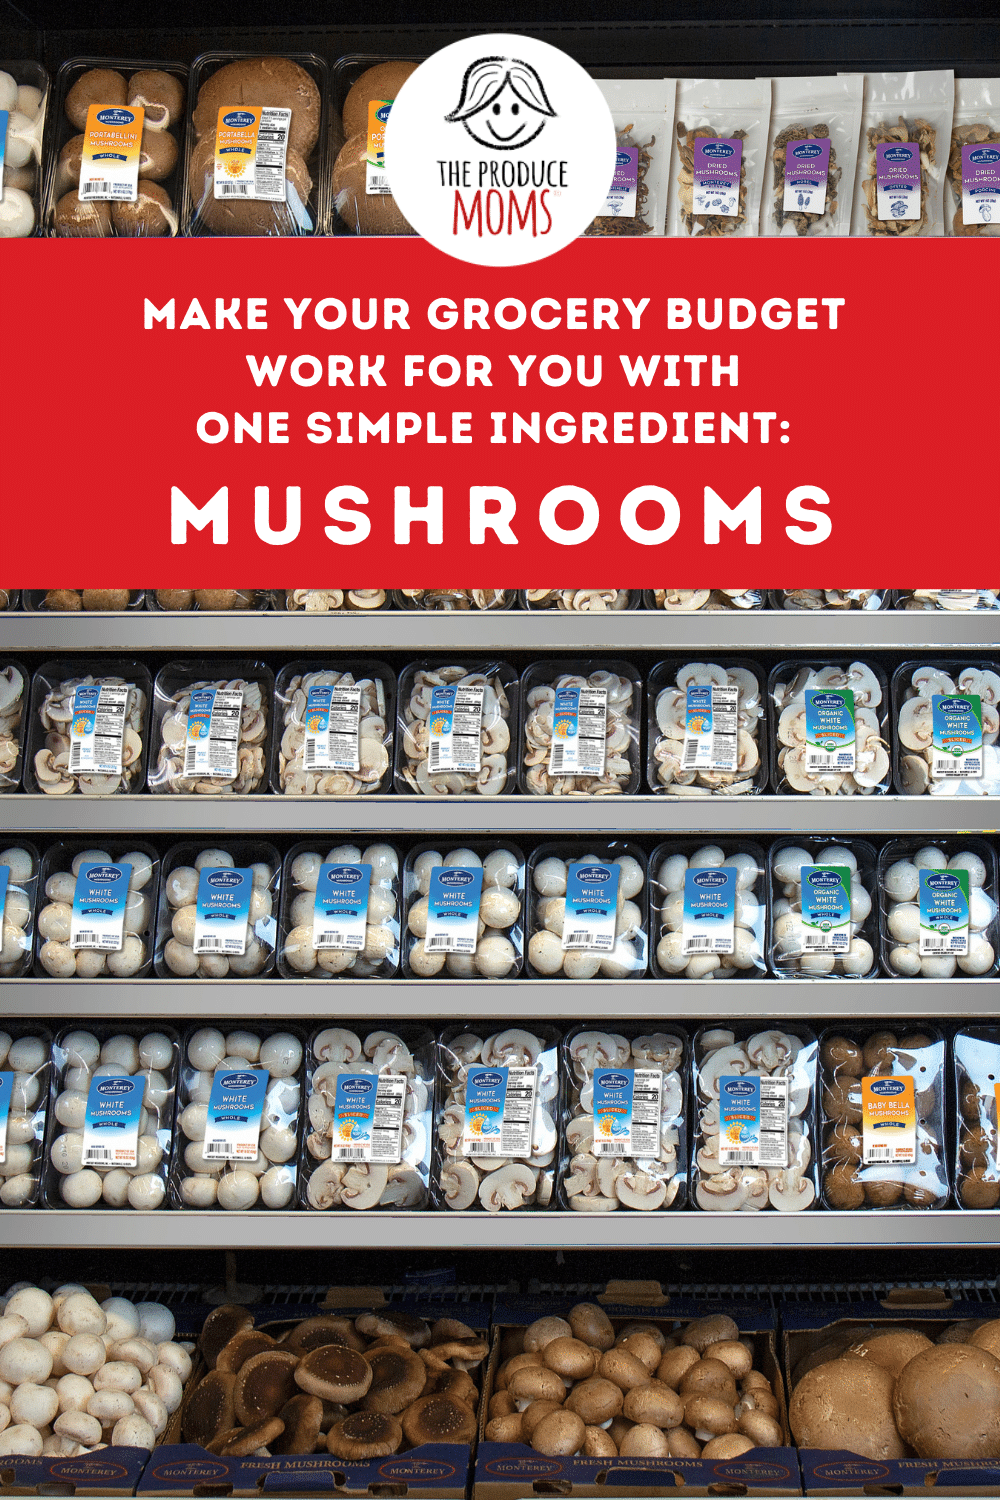 Pinterest Pin: Make Your Grocery Budget work for you with one simple ingredient: mushrooms